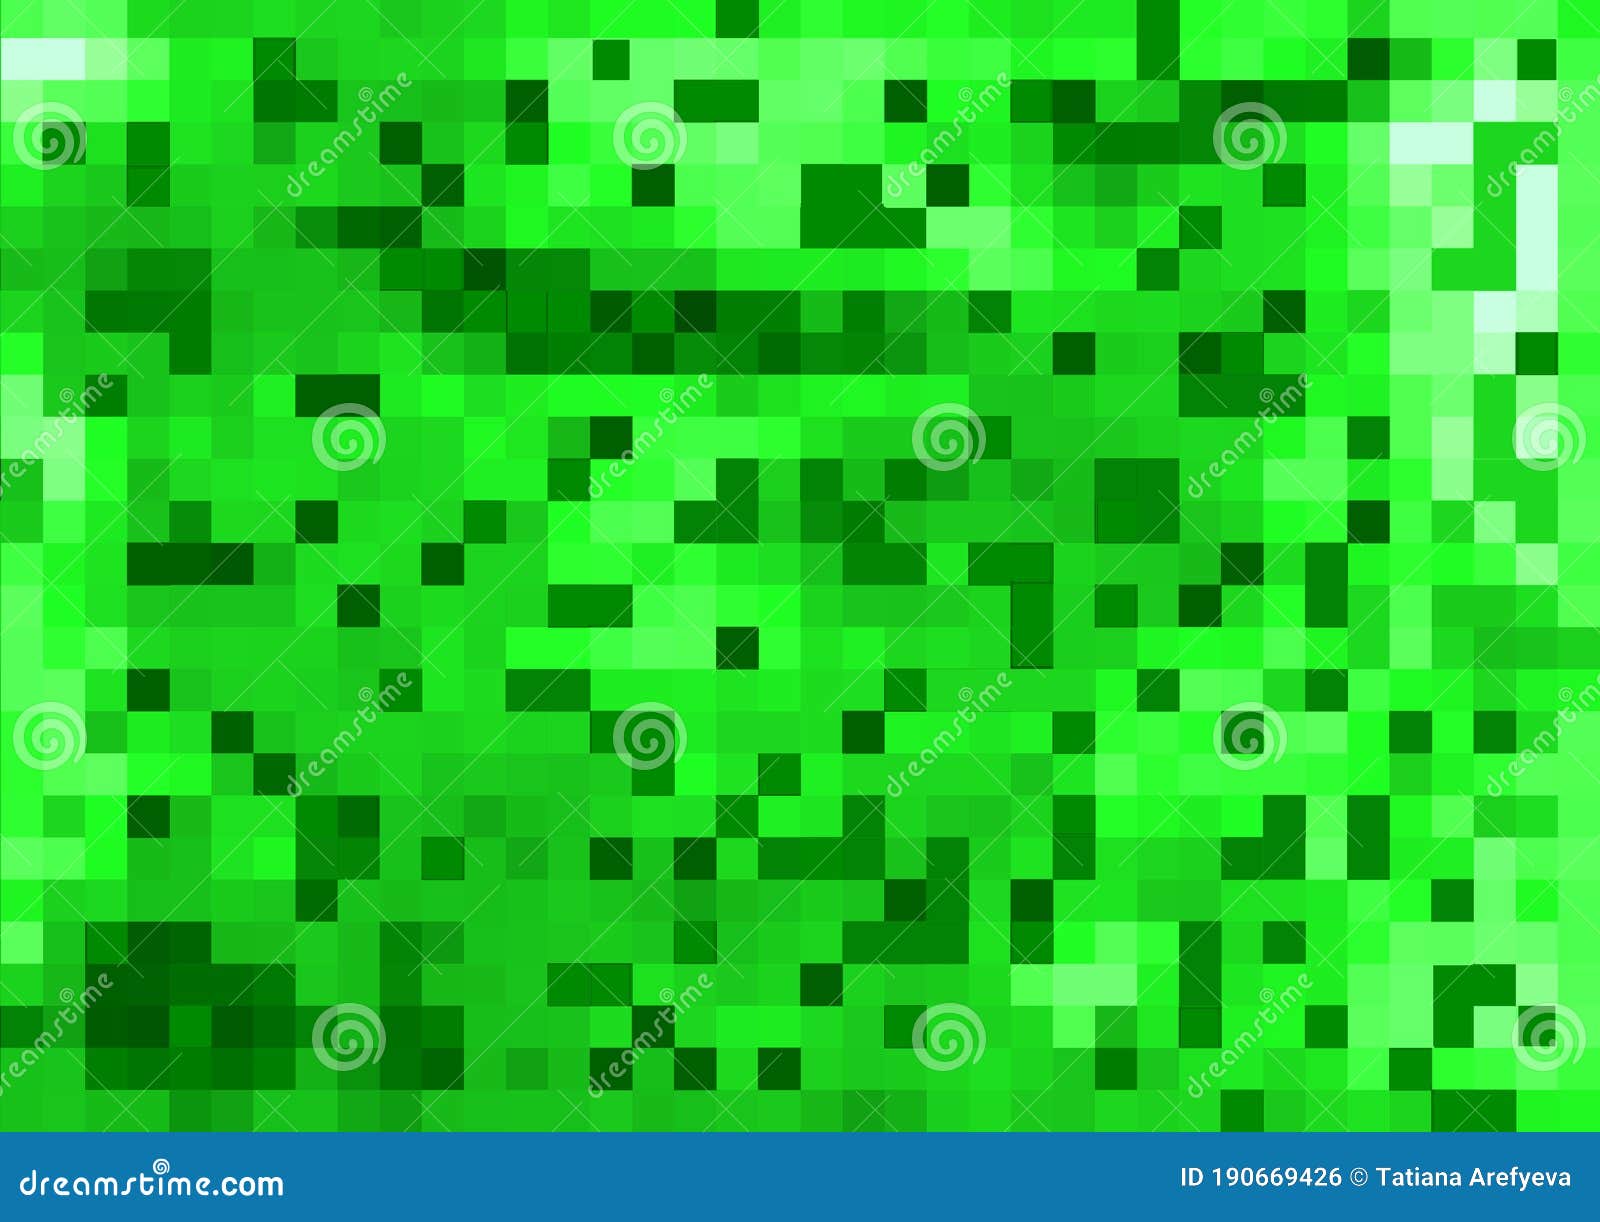 Abstract Background Minecraft Green Gradient Geometric Crystal Mosaic Stock Illustration Illustration Of Blurred Backgrounds 190669426 - roblox template gradient